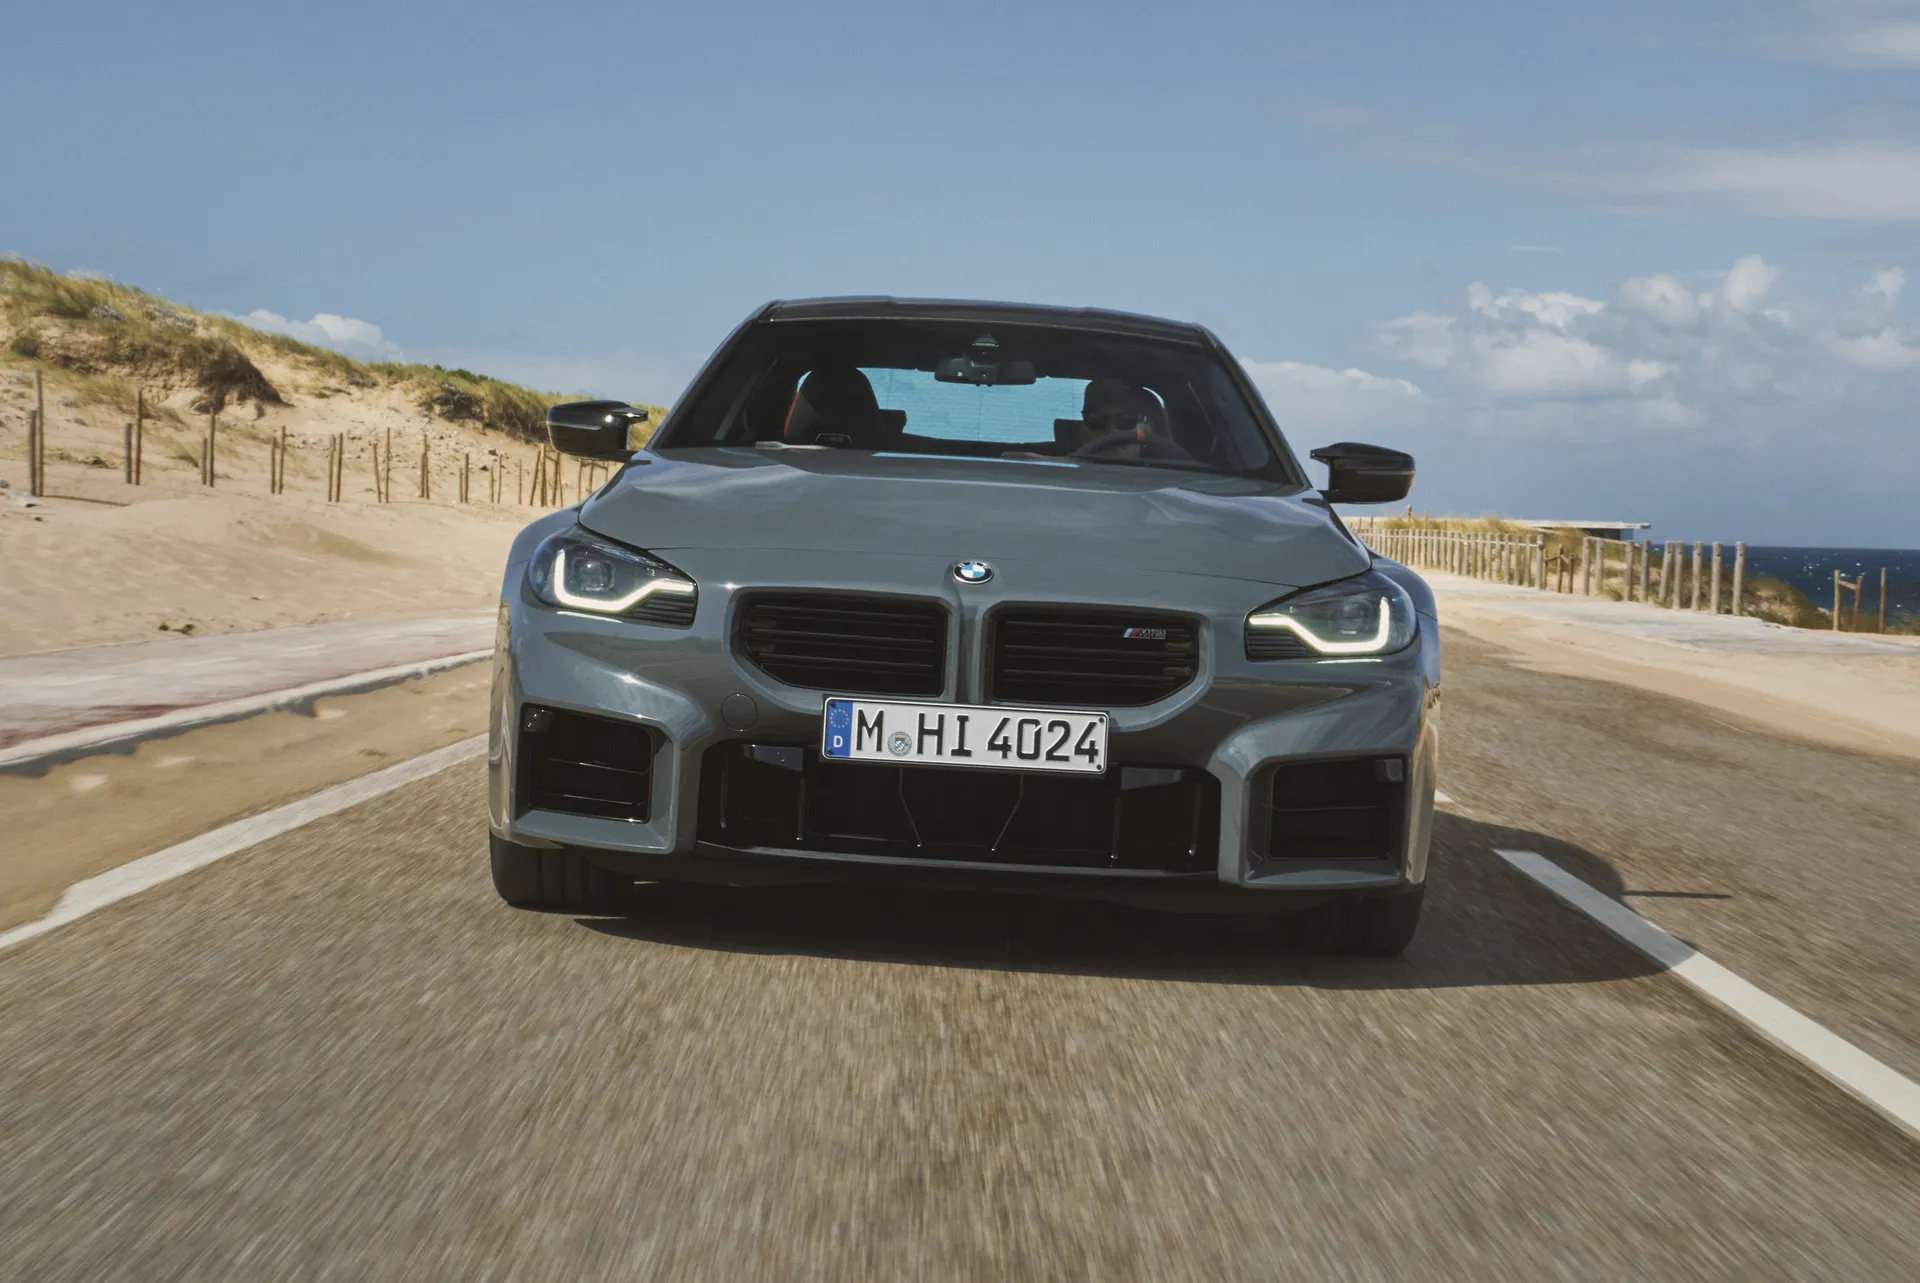 2025 BMW M2 rivals the power of the M3